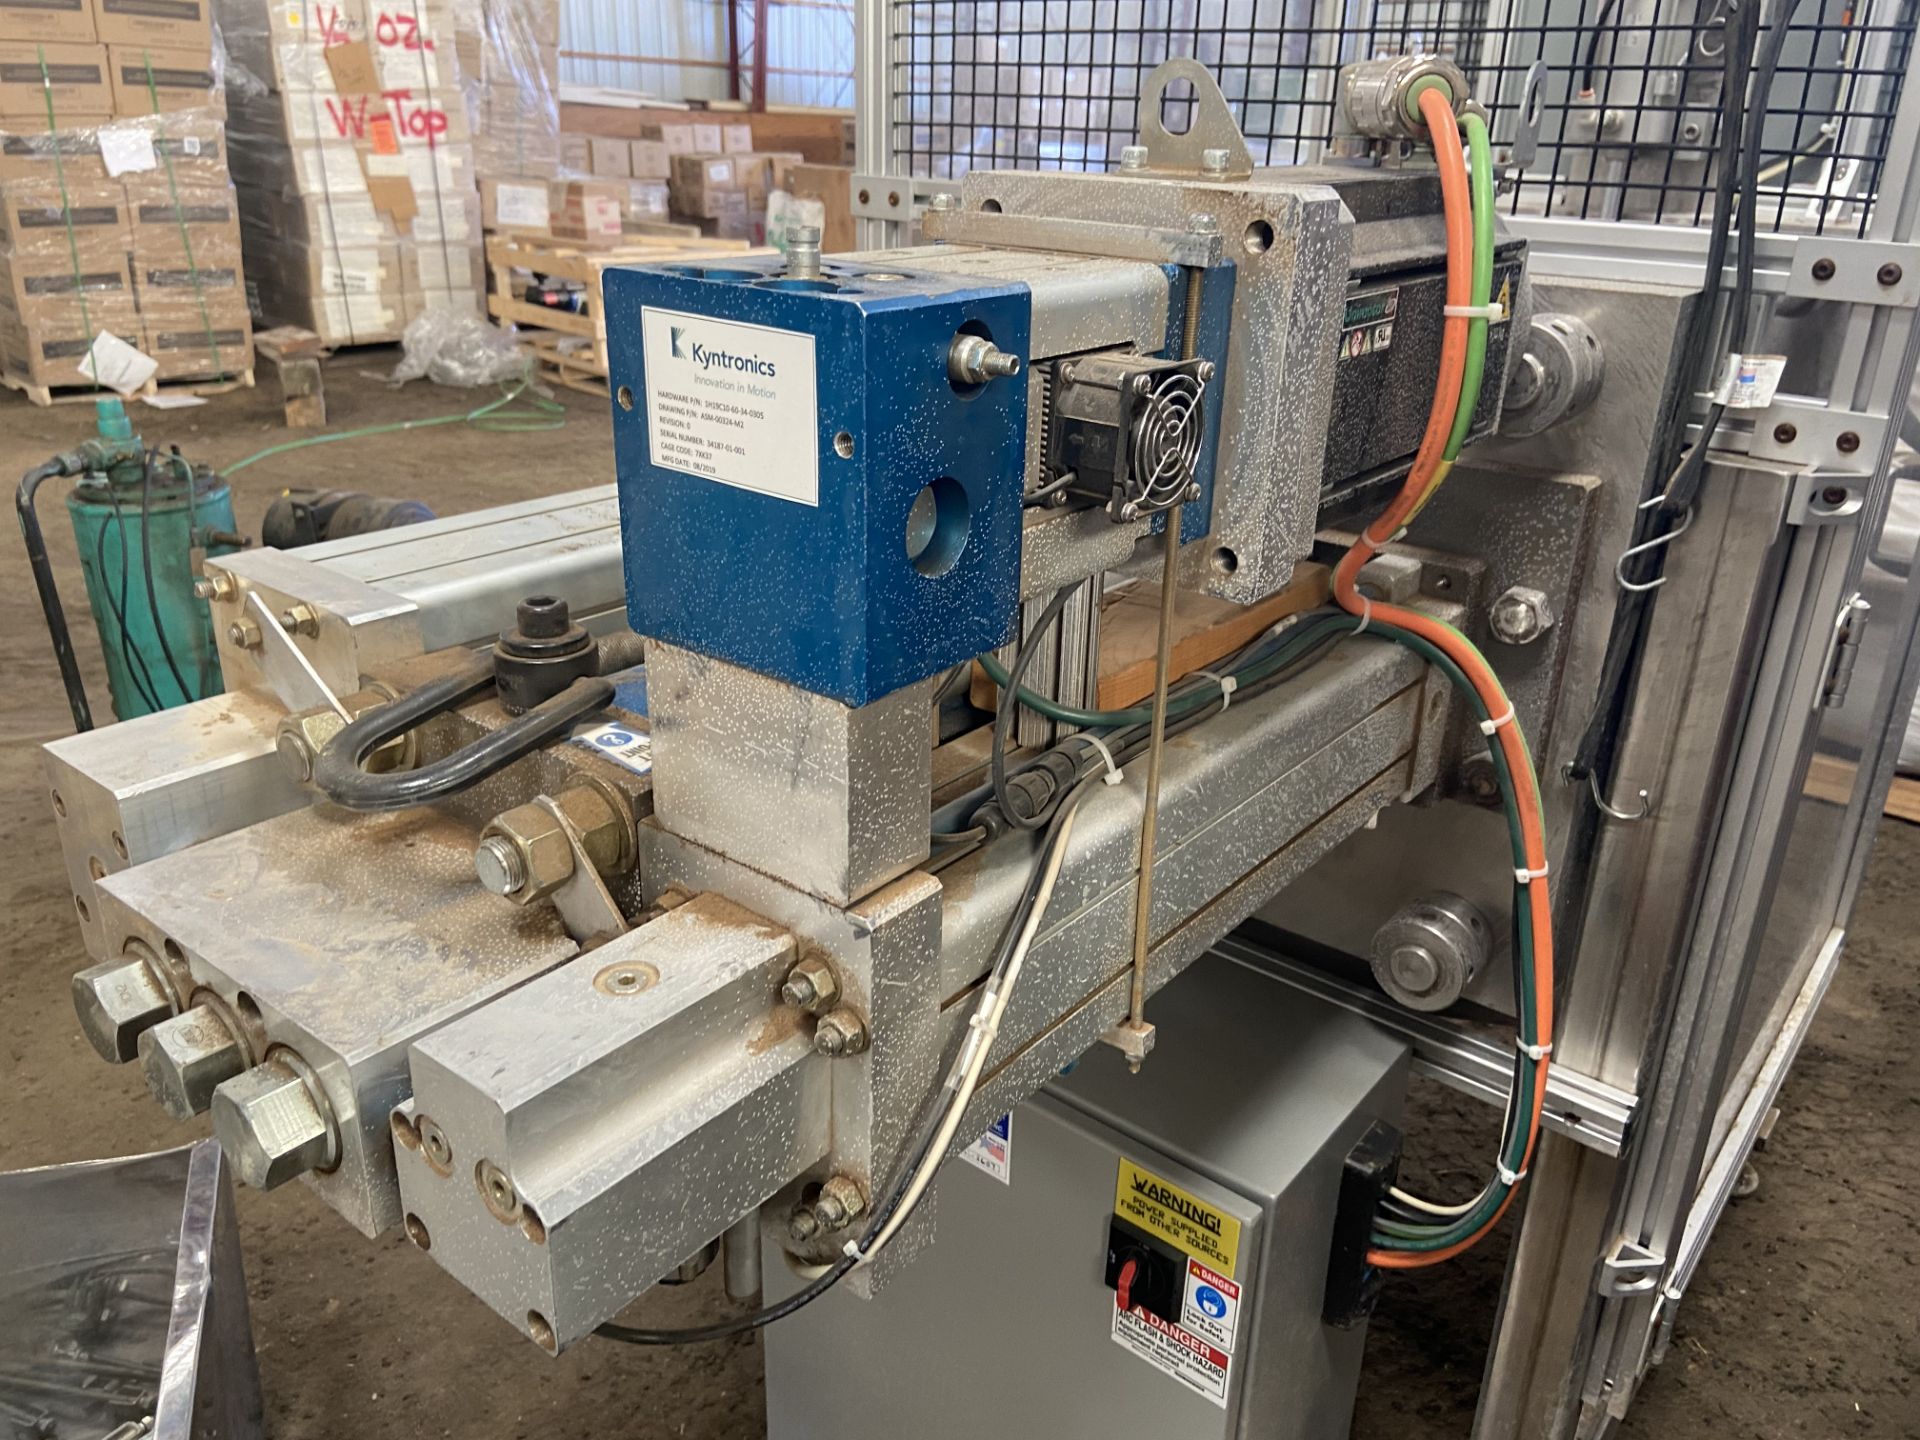 Kyntronics Hydraulic Actuator Press, Serial# 34187-01-001, Year 2019, Rigging/ Loading Fee: $50 - Image 5 of 9